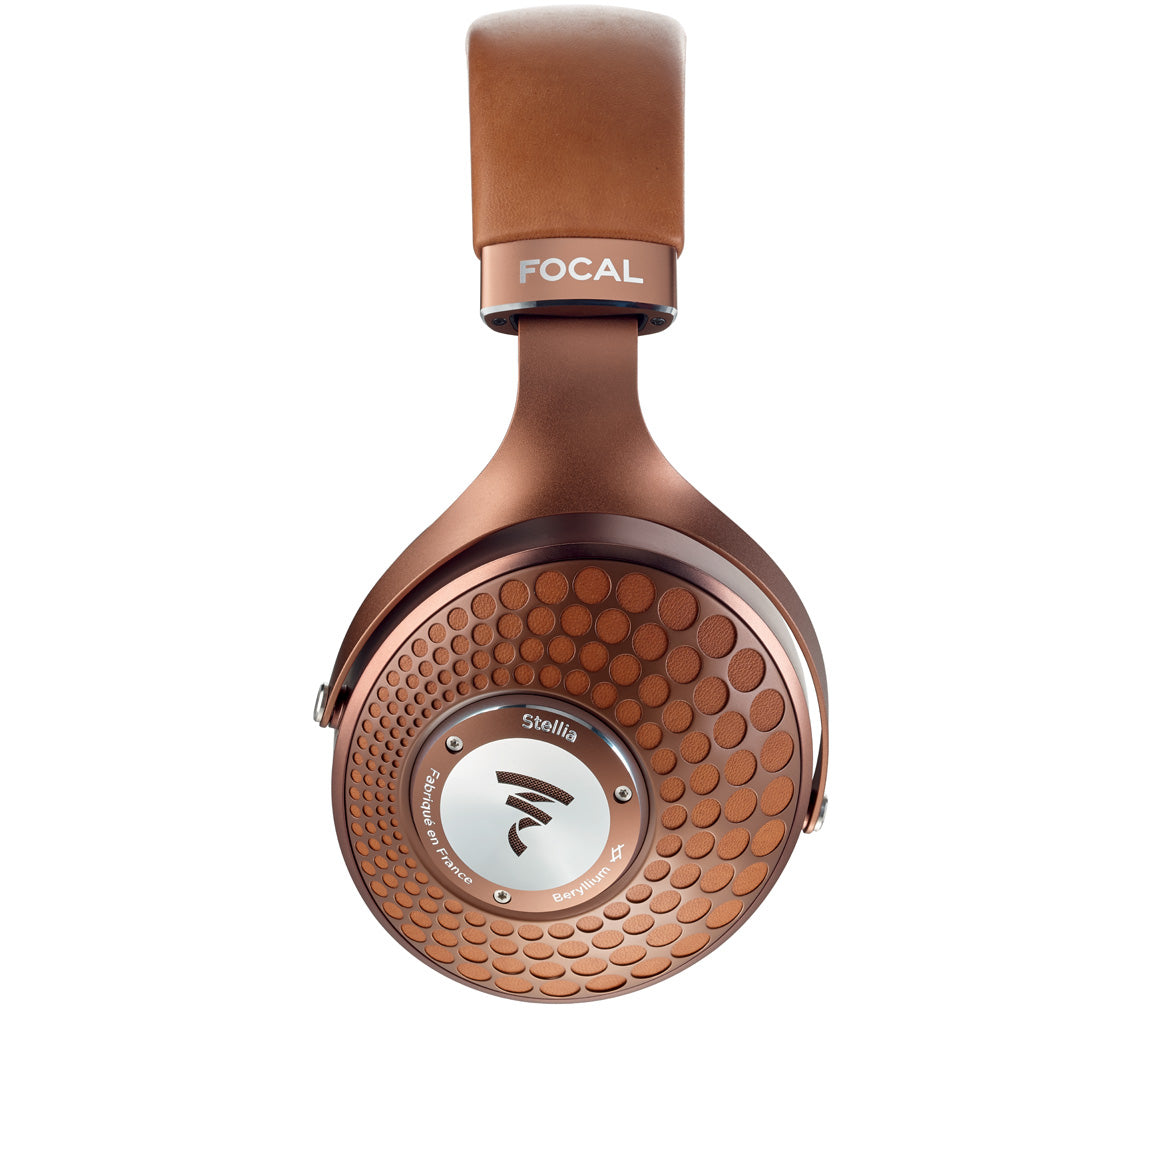 Best price for all Focal Headphones available at vinylsound.ca FOCAL UTOPIA 2020 HEADPHONE - FOCAL CLEAR MG HEADPHONE - FOCAL STELLIA HEADPHONE - FOCAL CELESTEE HEADPHONE - FOCAL LISTEN WIRELESS HEADPHONE - FOCAL SPHEAR WIRELESS HEADPHONE…